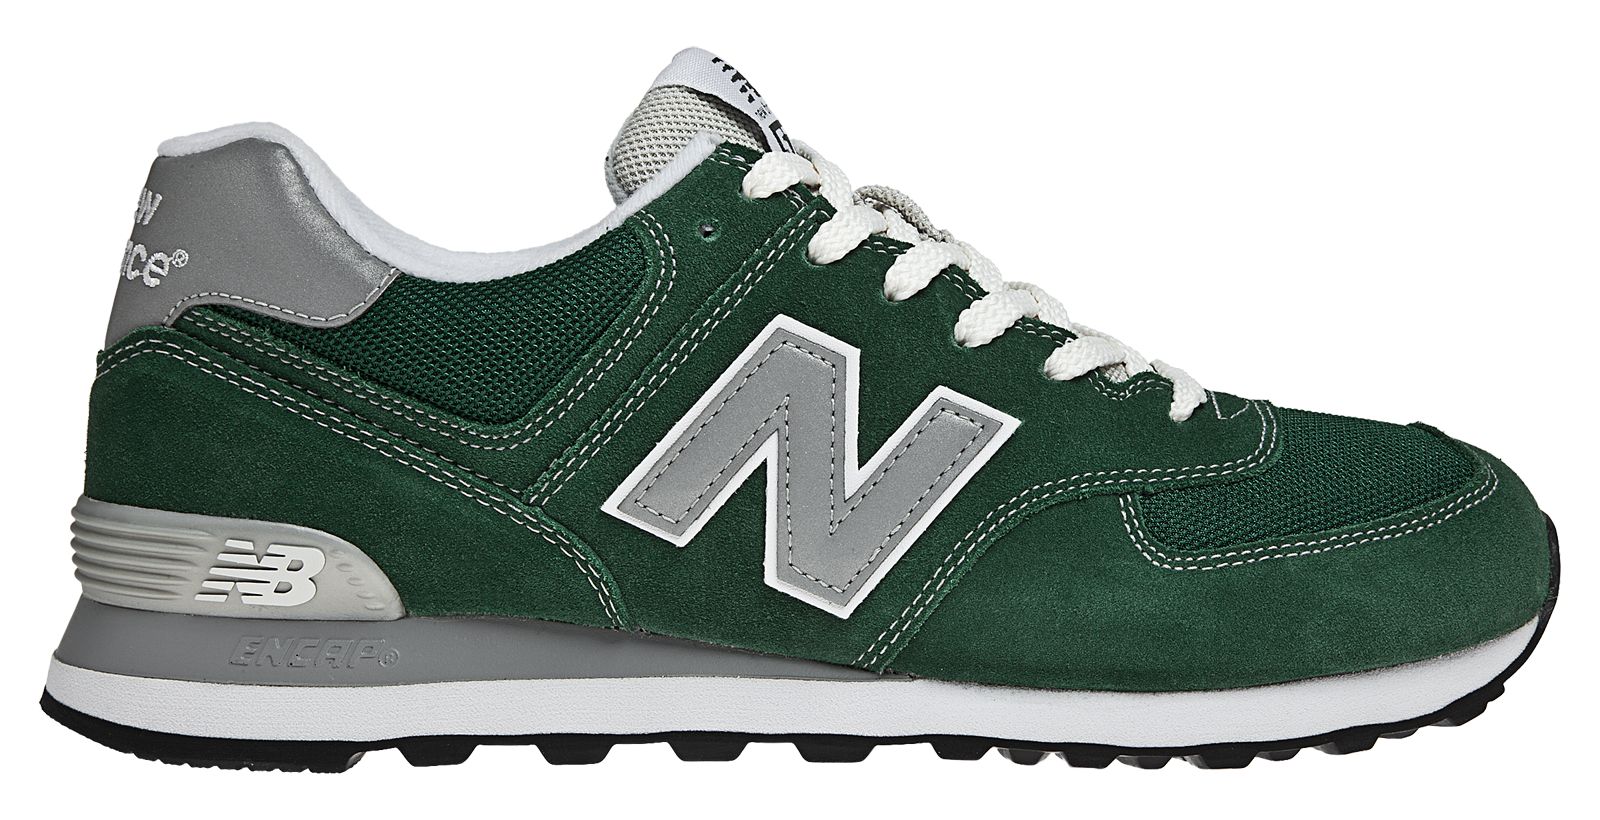 New Balance ML574 on Sale - Discounts Up to 33% Off on ML574GGE at Joe's New  Balance Outlet